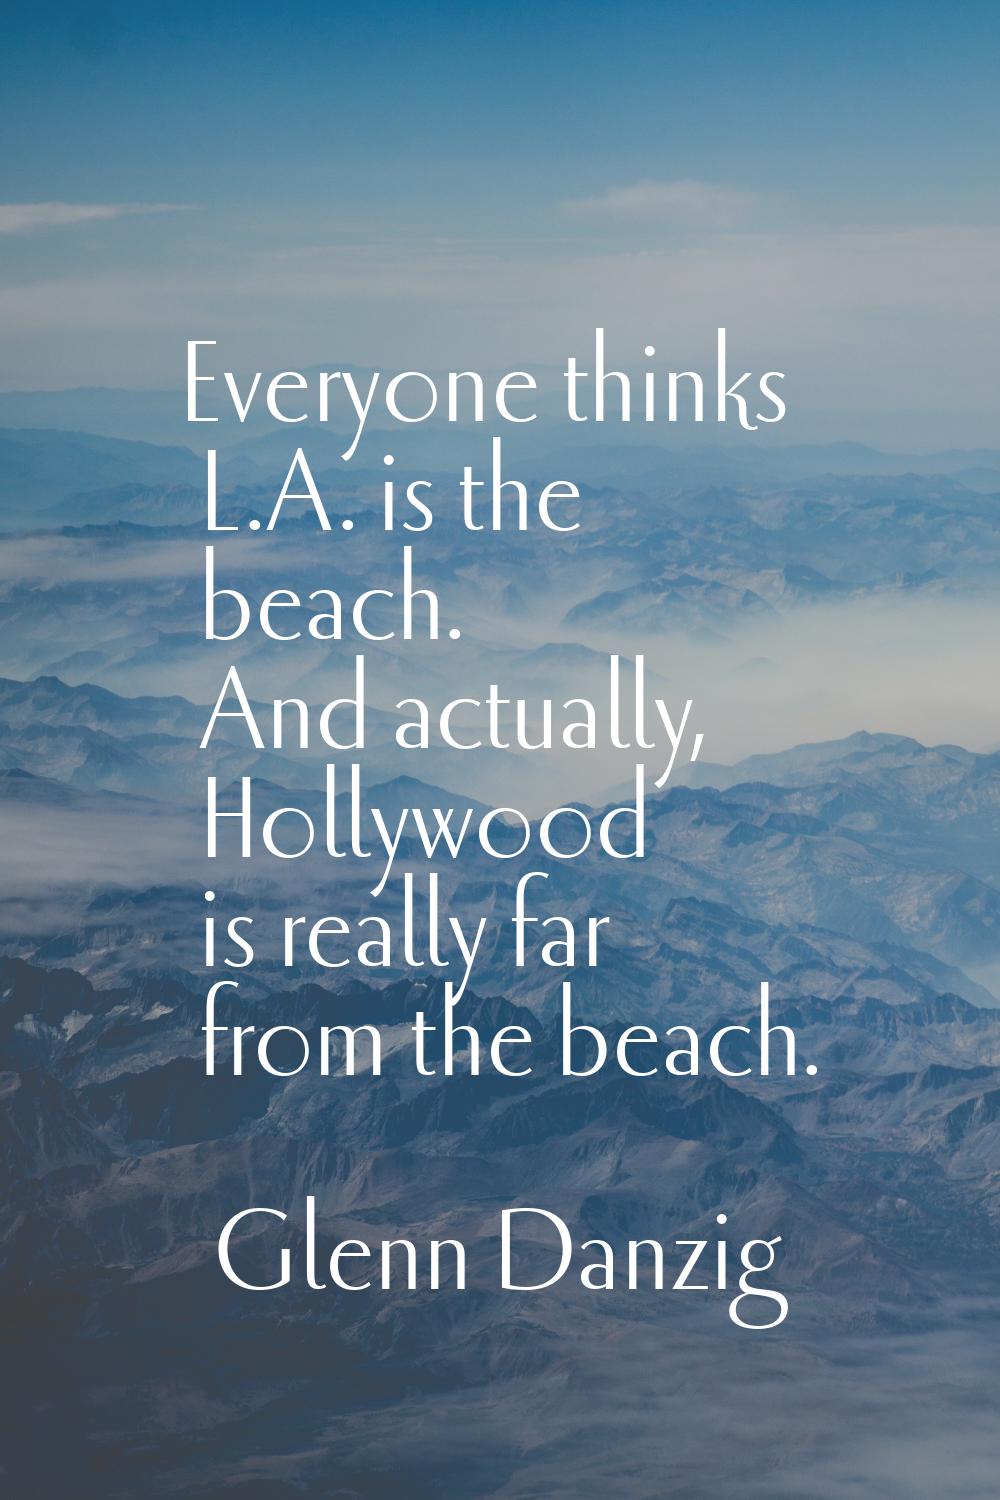 Everyone thinks L.A. is the beach. And actually, Hollywood is really far from the beach.